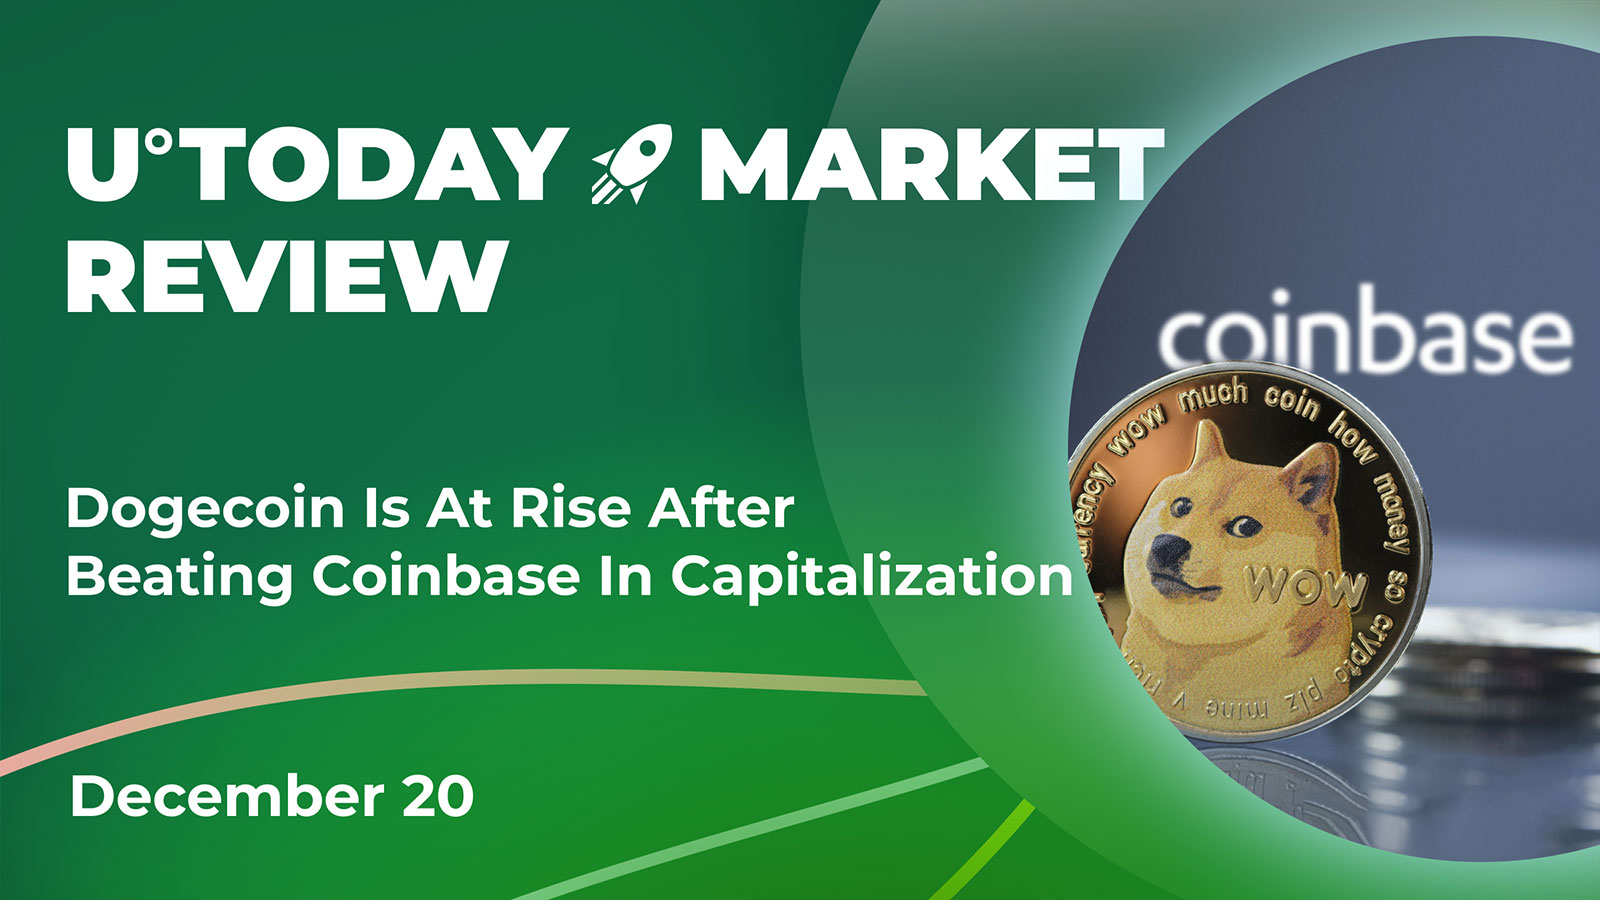 Dogecoin Is At Rise After Beating Coinbase In Capitalization: Crypto Market Review, Dec.20